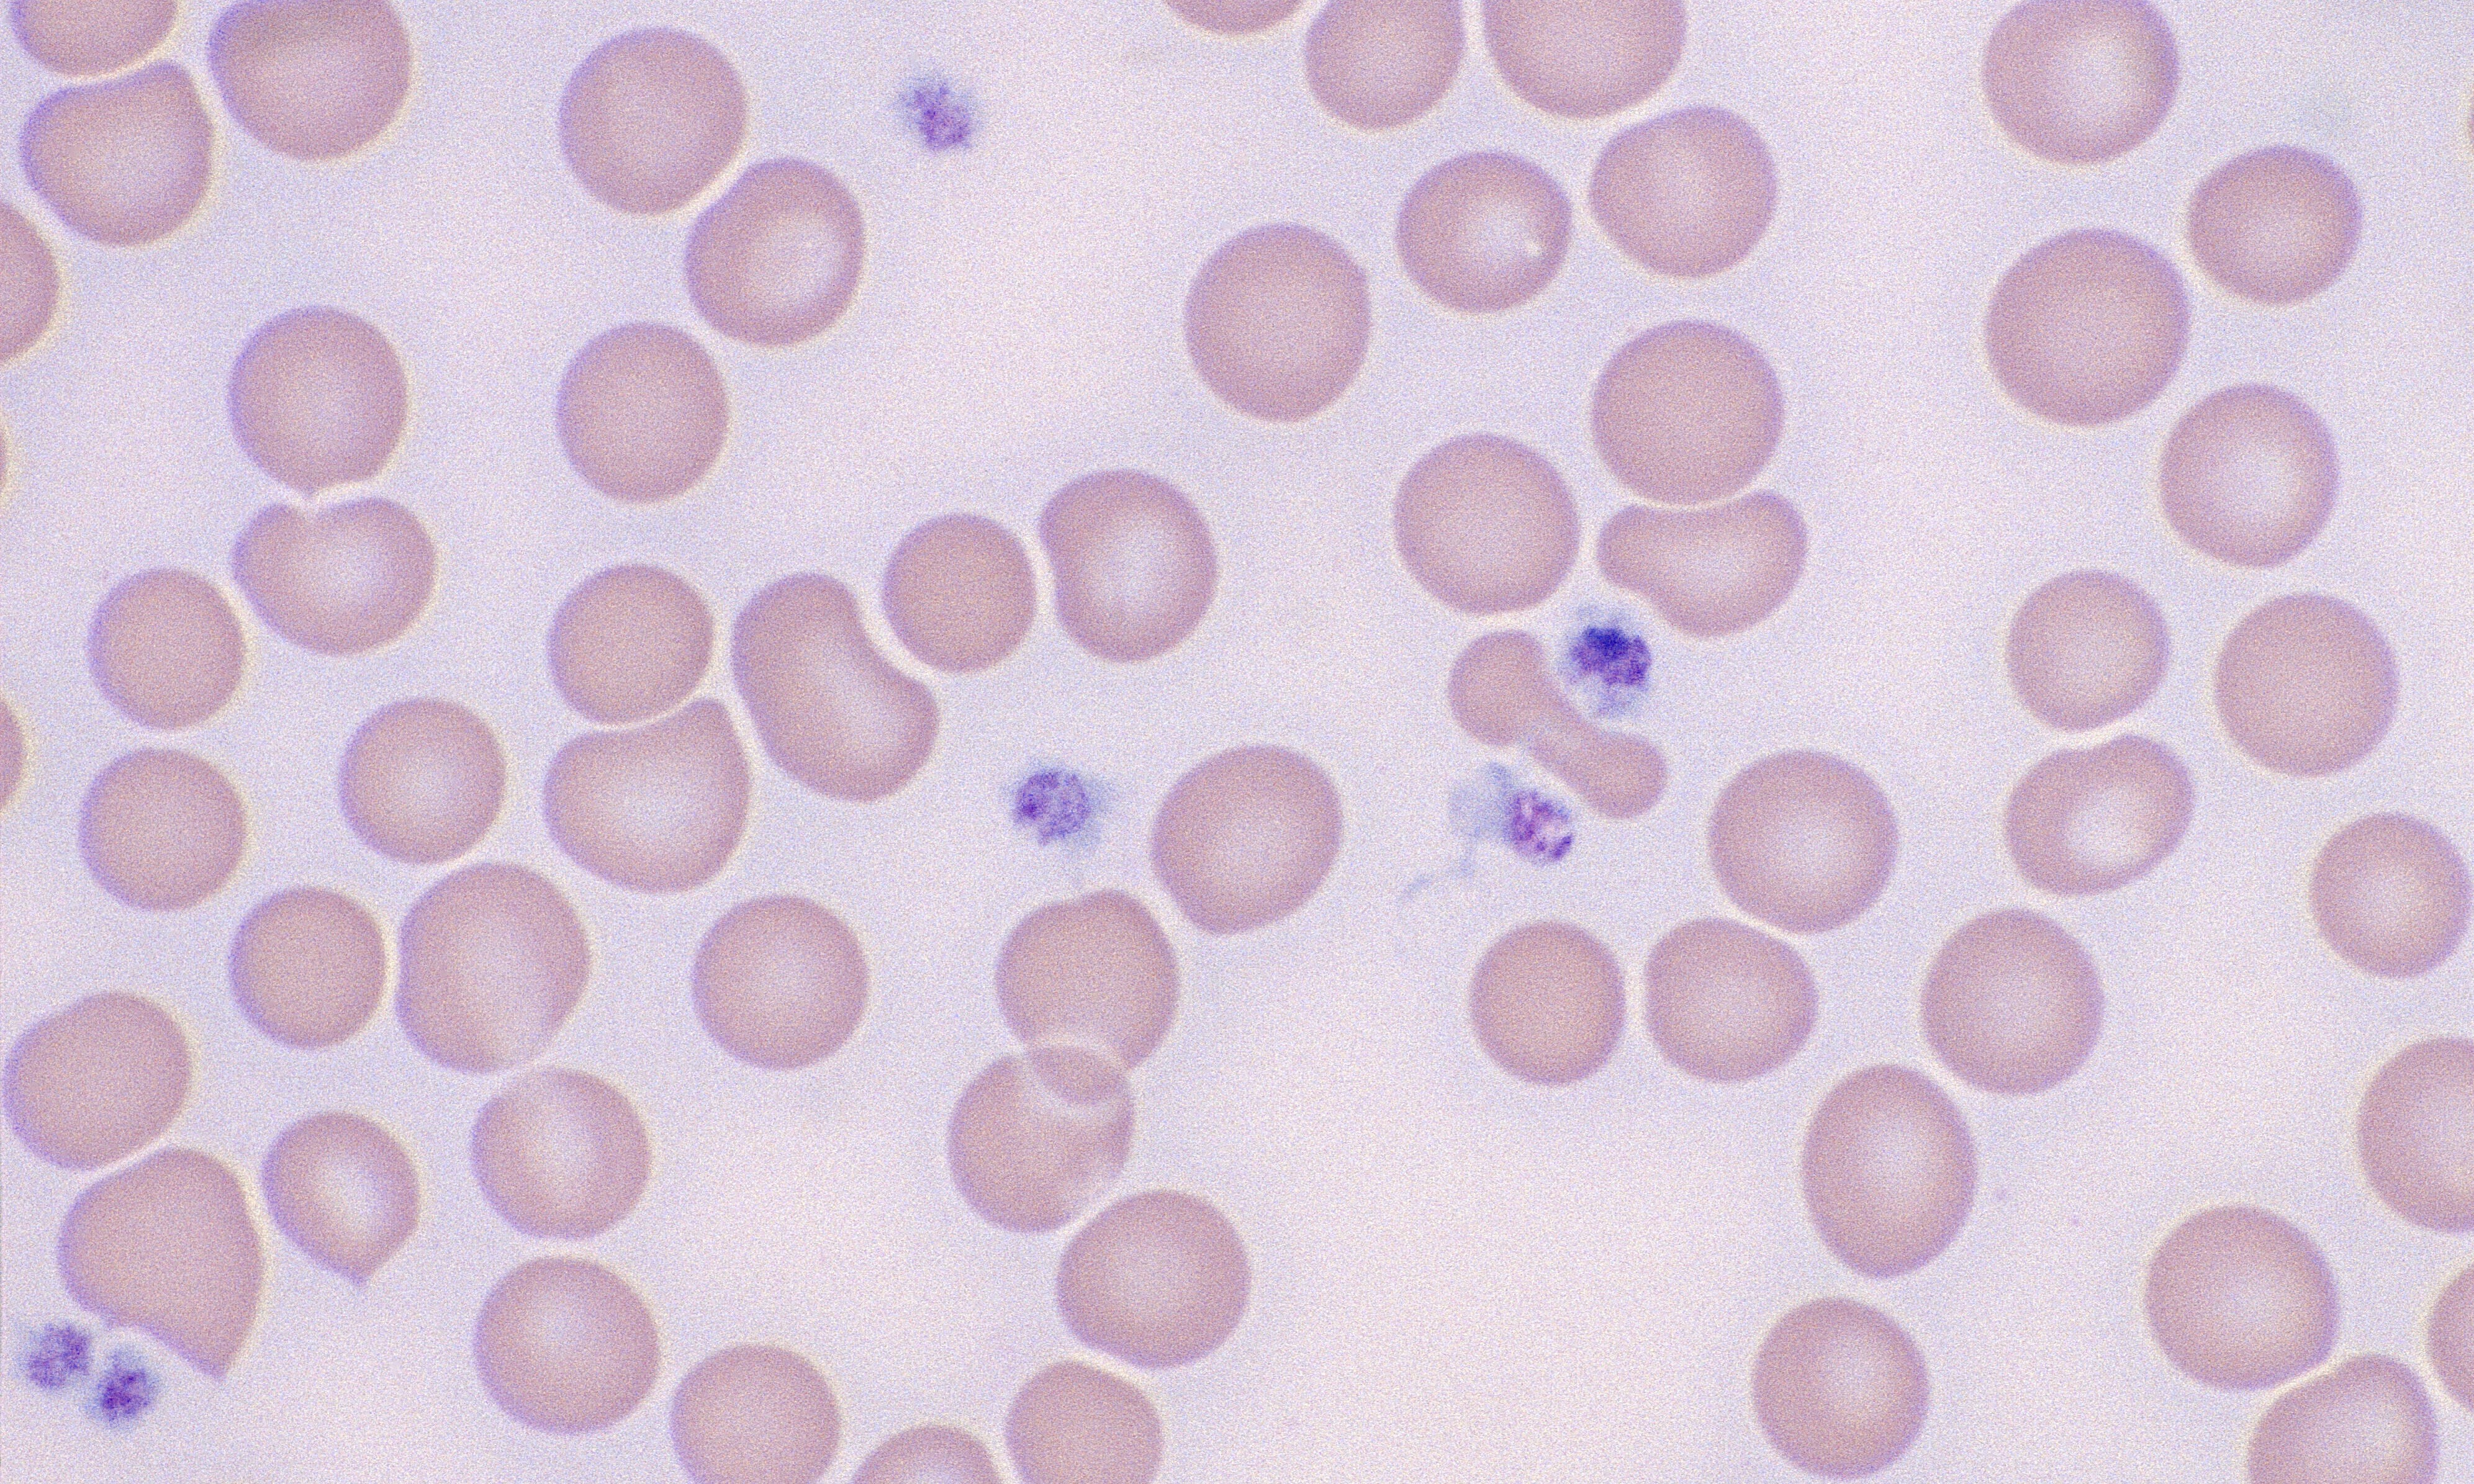 Platelets 3 (Canine 3)